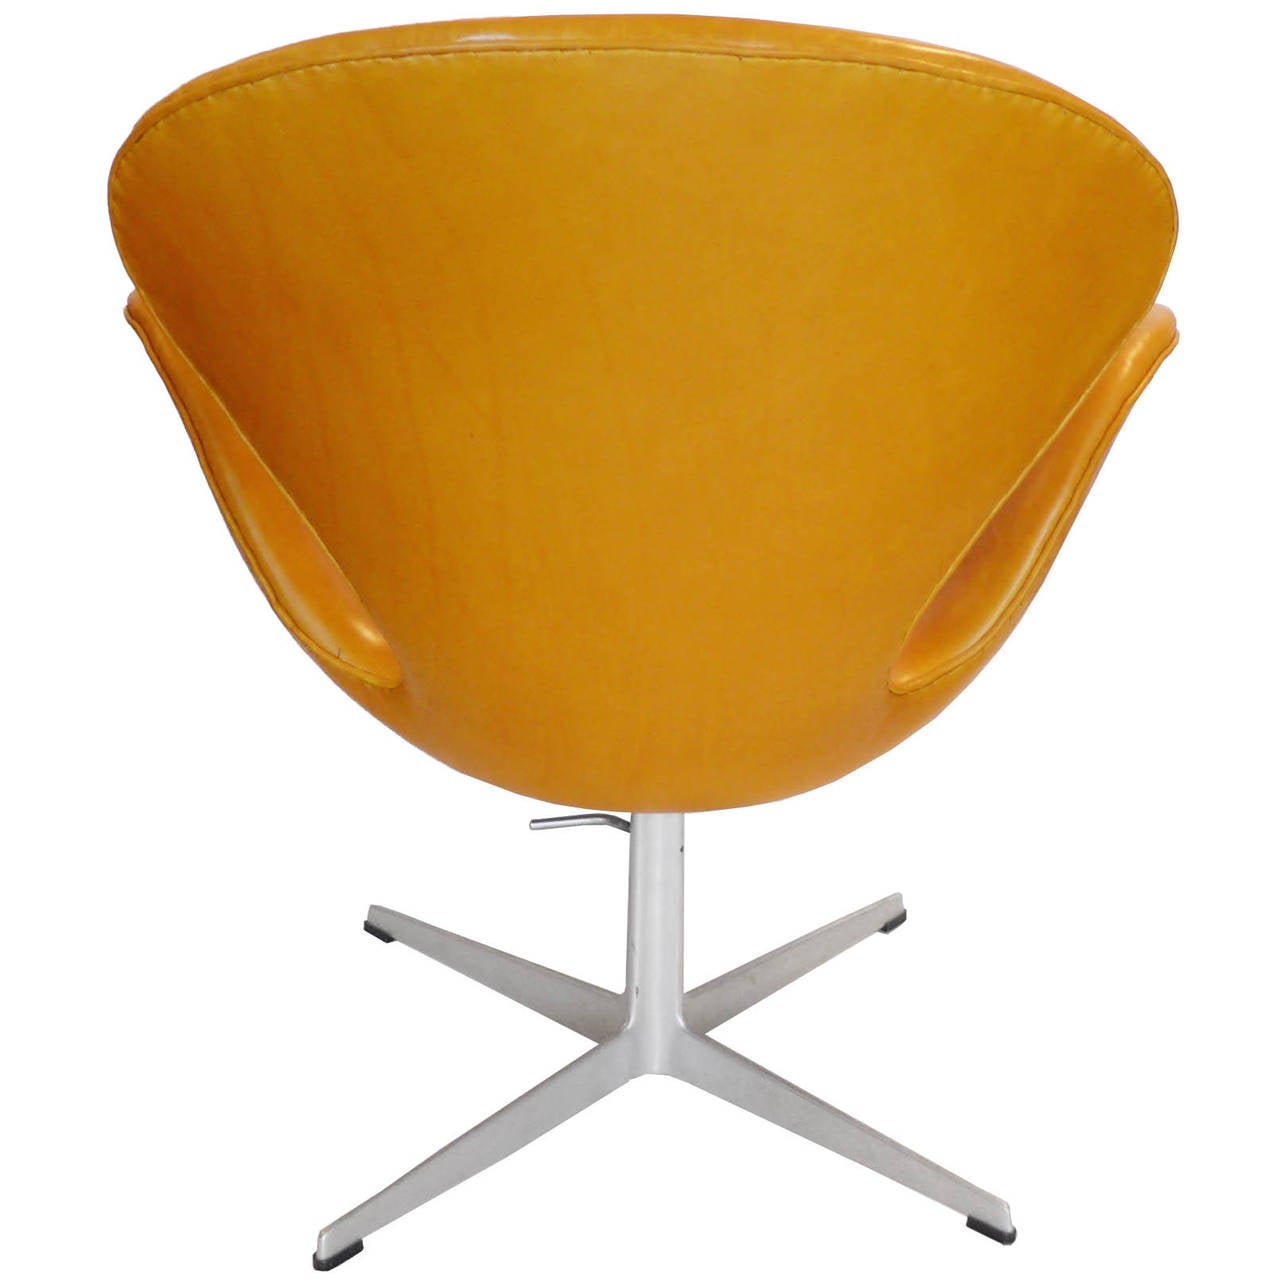 This is a rare saddle tan leather adjustable swan chair. It is a great chair. This variation was manufactured by Fritz Hansen for a very short time. The seat adjusts from 16.5”-20”. It can adjust in height from the standard swan lounge height to a